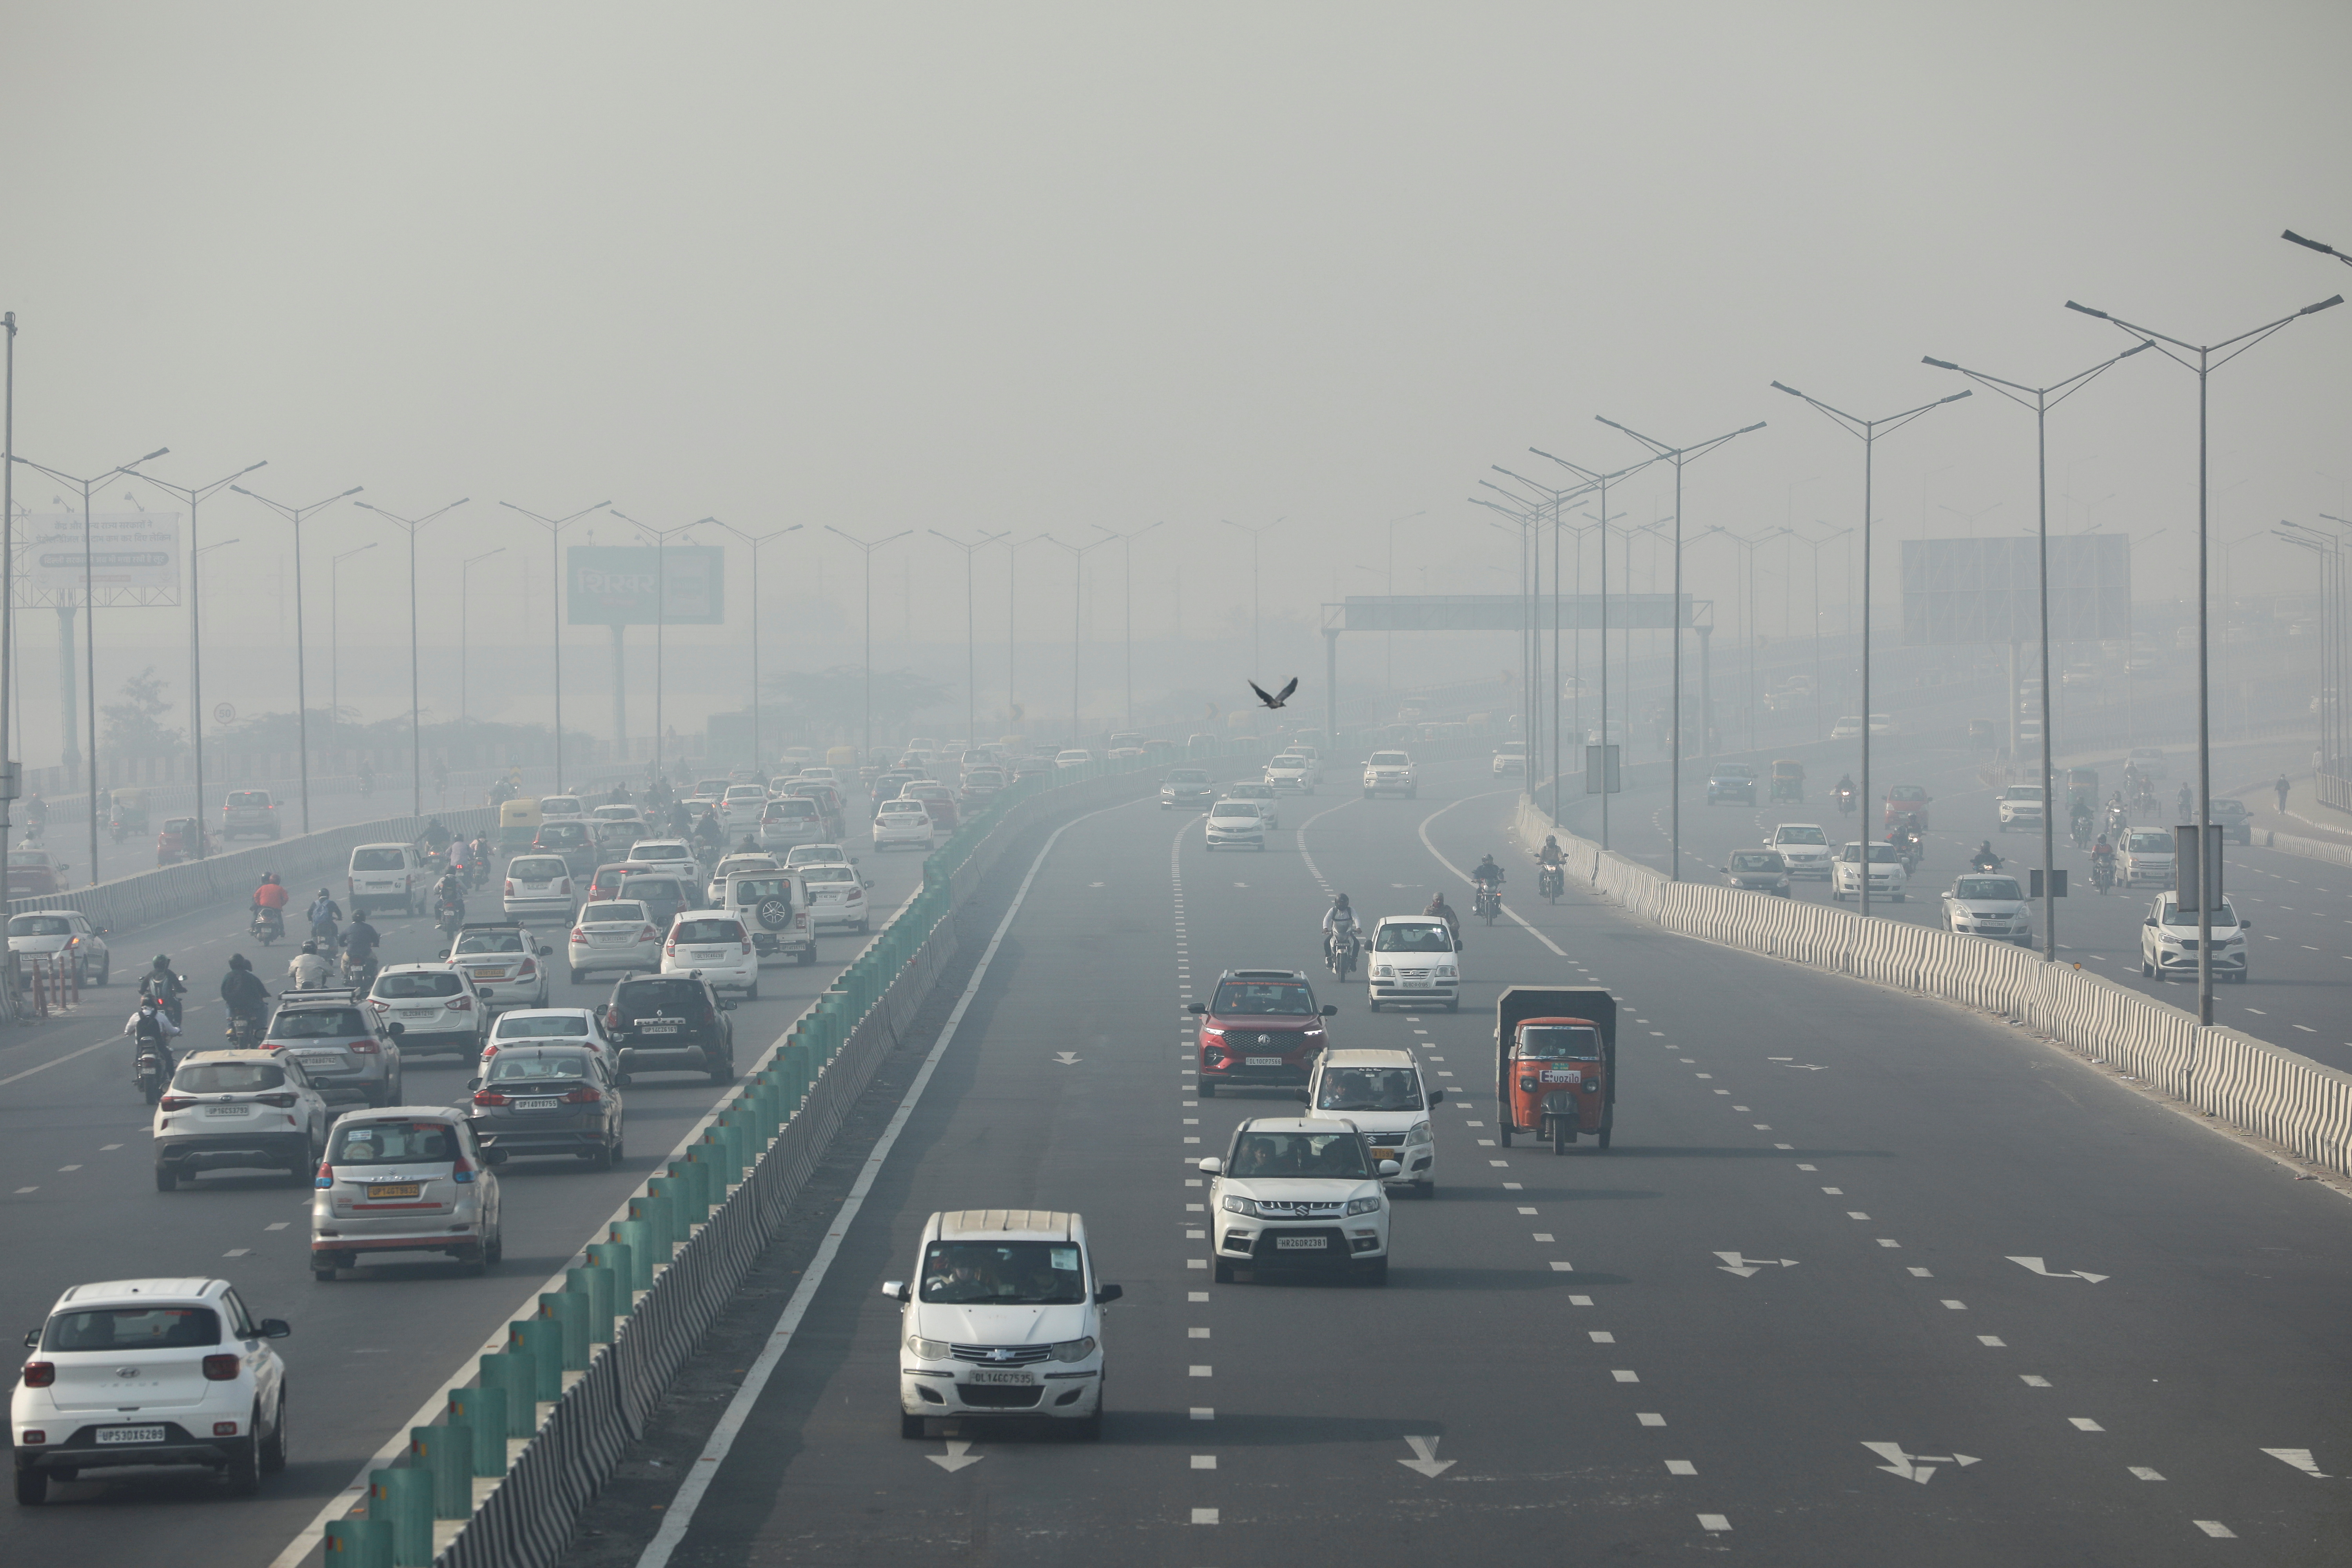 Vehicles are seen shrouded in smog on a highway in New Delhi, India